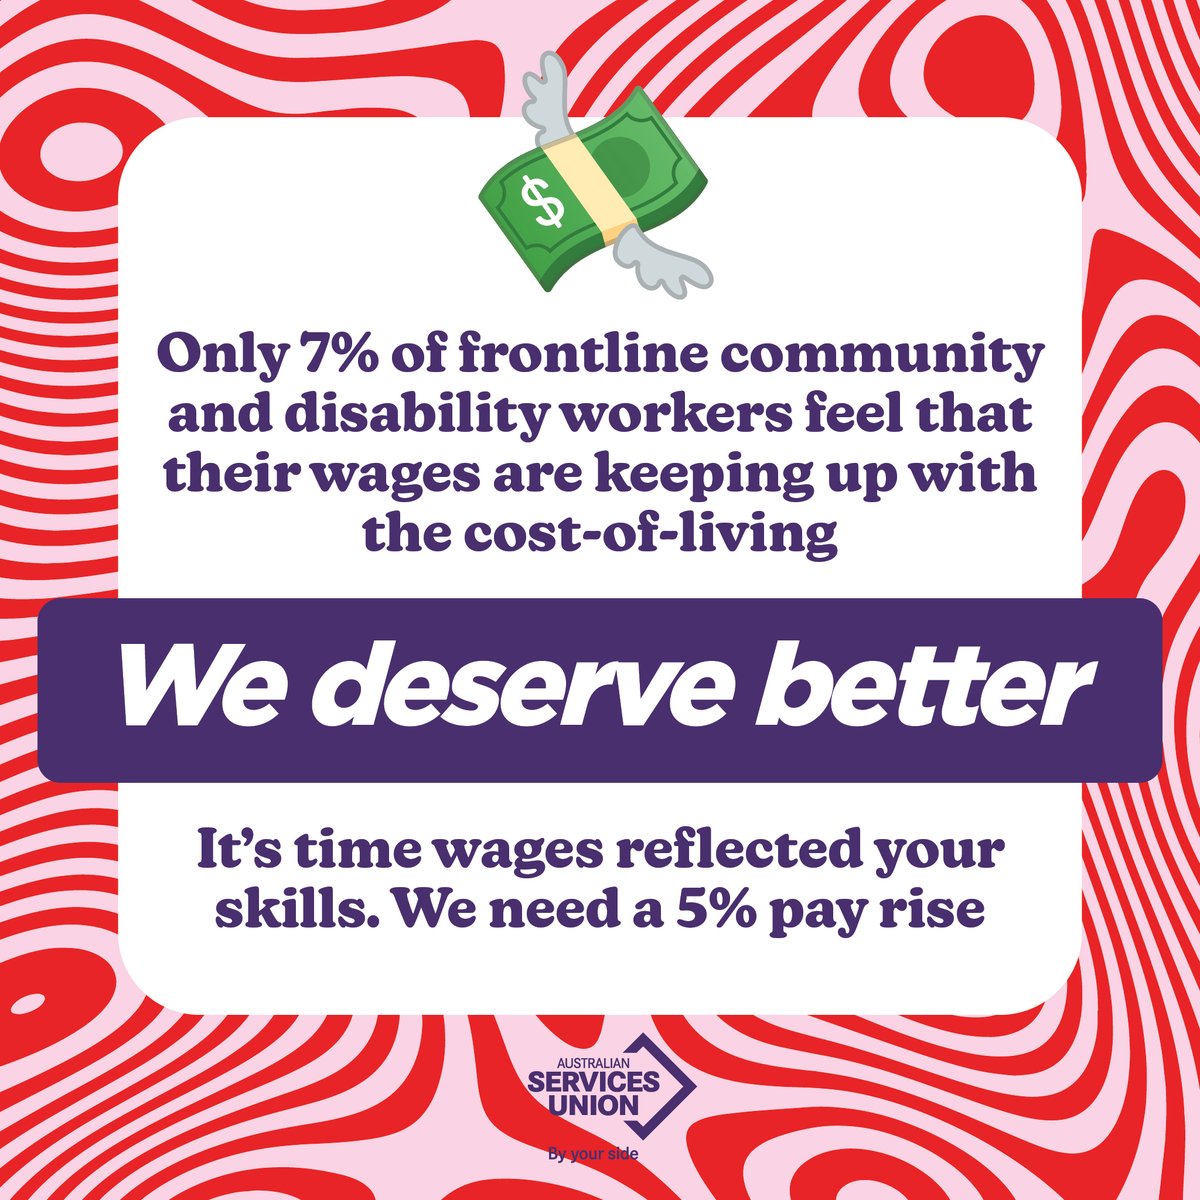 It’s time to lift the wages and conditions for workers who are on the frontline, supporting the most vulnerable in our communities. ASU members are calling for a 5% increase in this year's Annual Wage Review. Will you join them? Sign the petition: bit.ly/4aumuAP